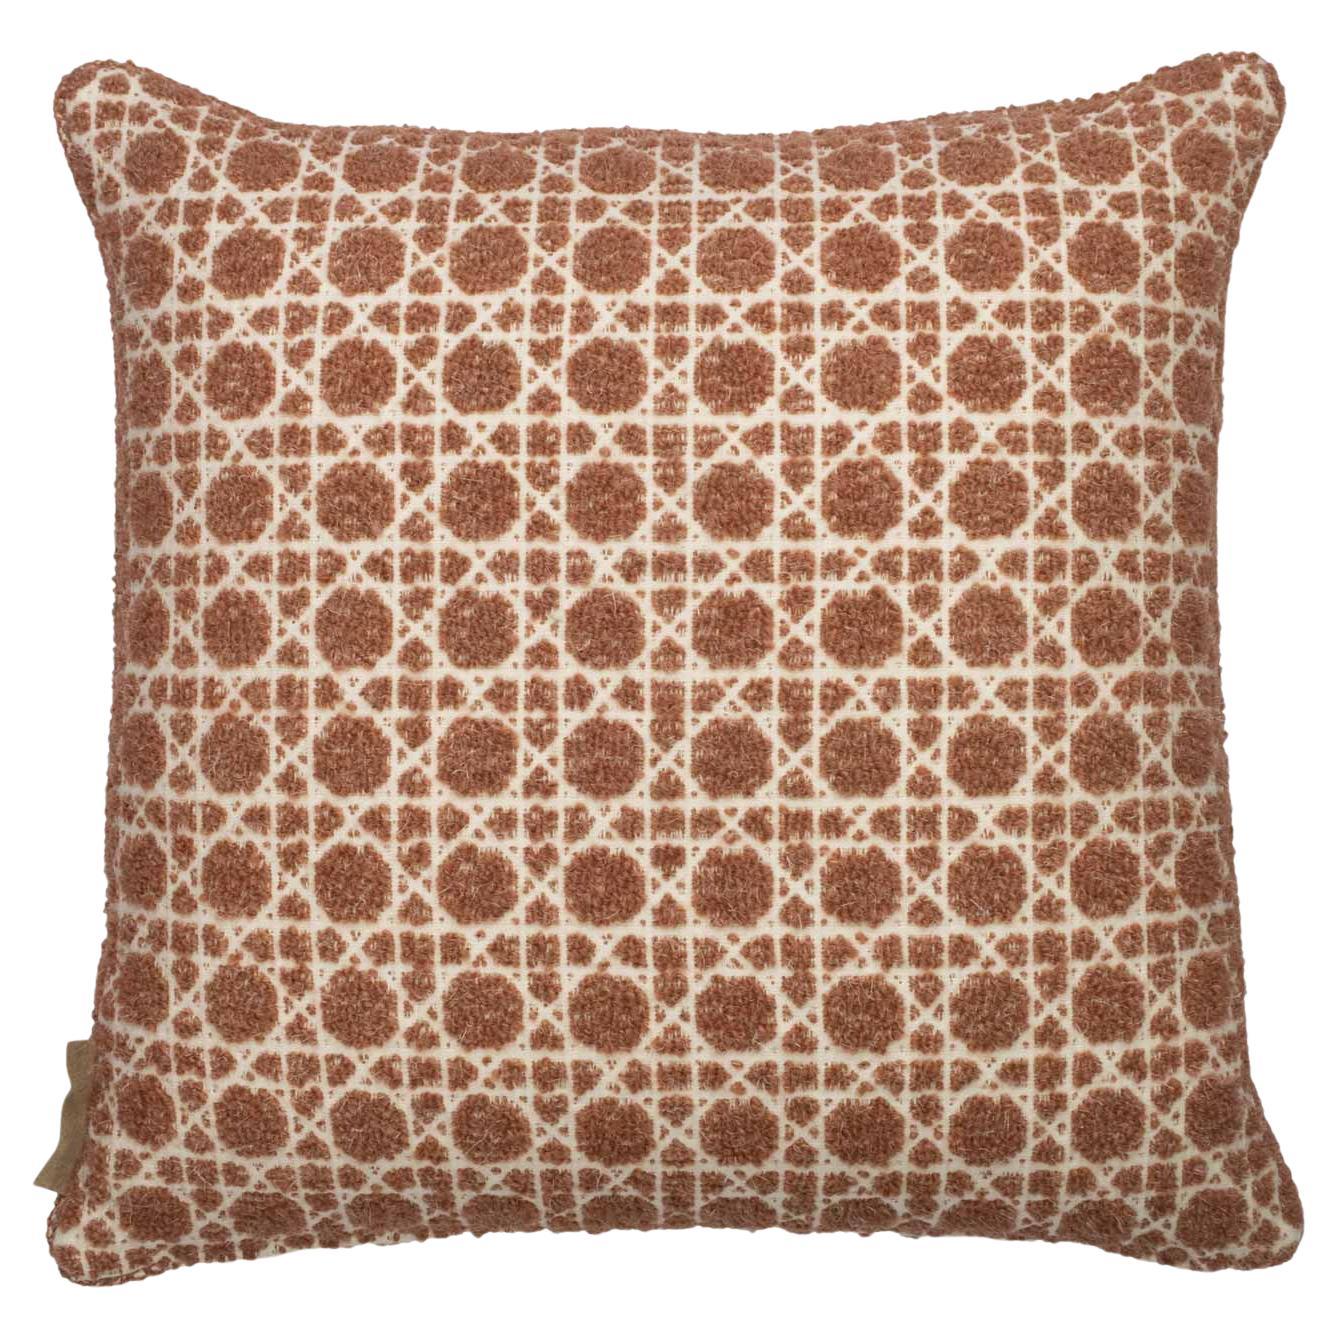 Modern Textured Patterned Throw Pillow Pink "Cannage" by Evolution21